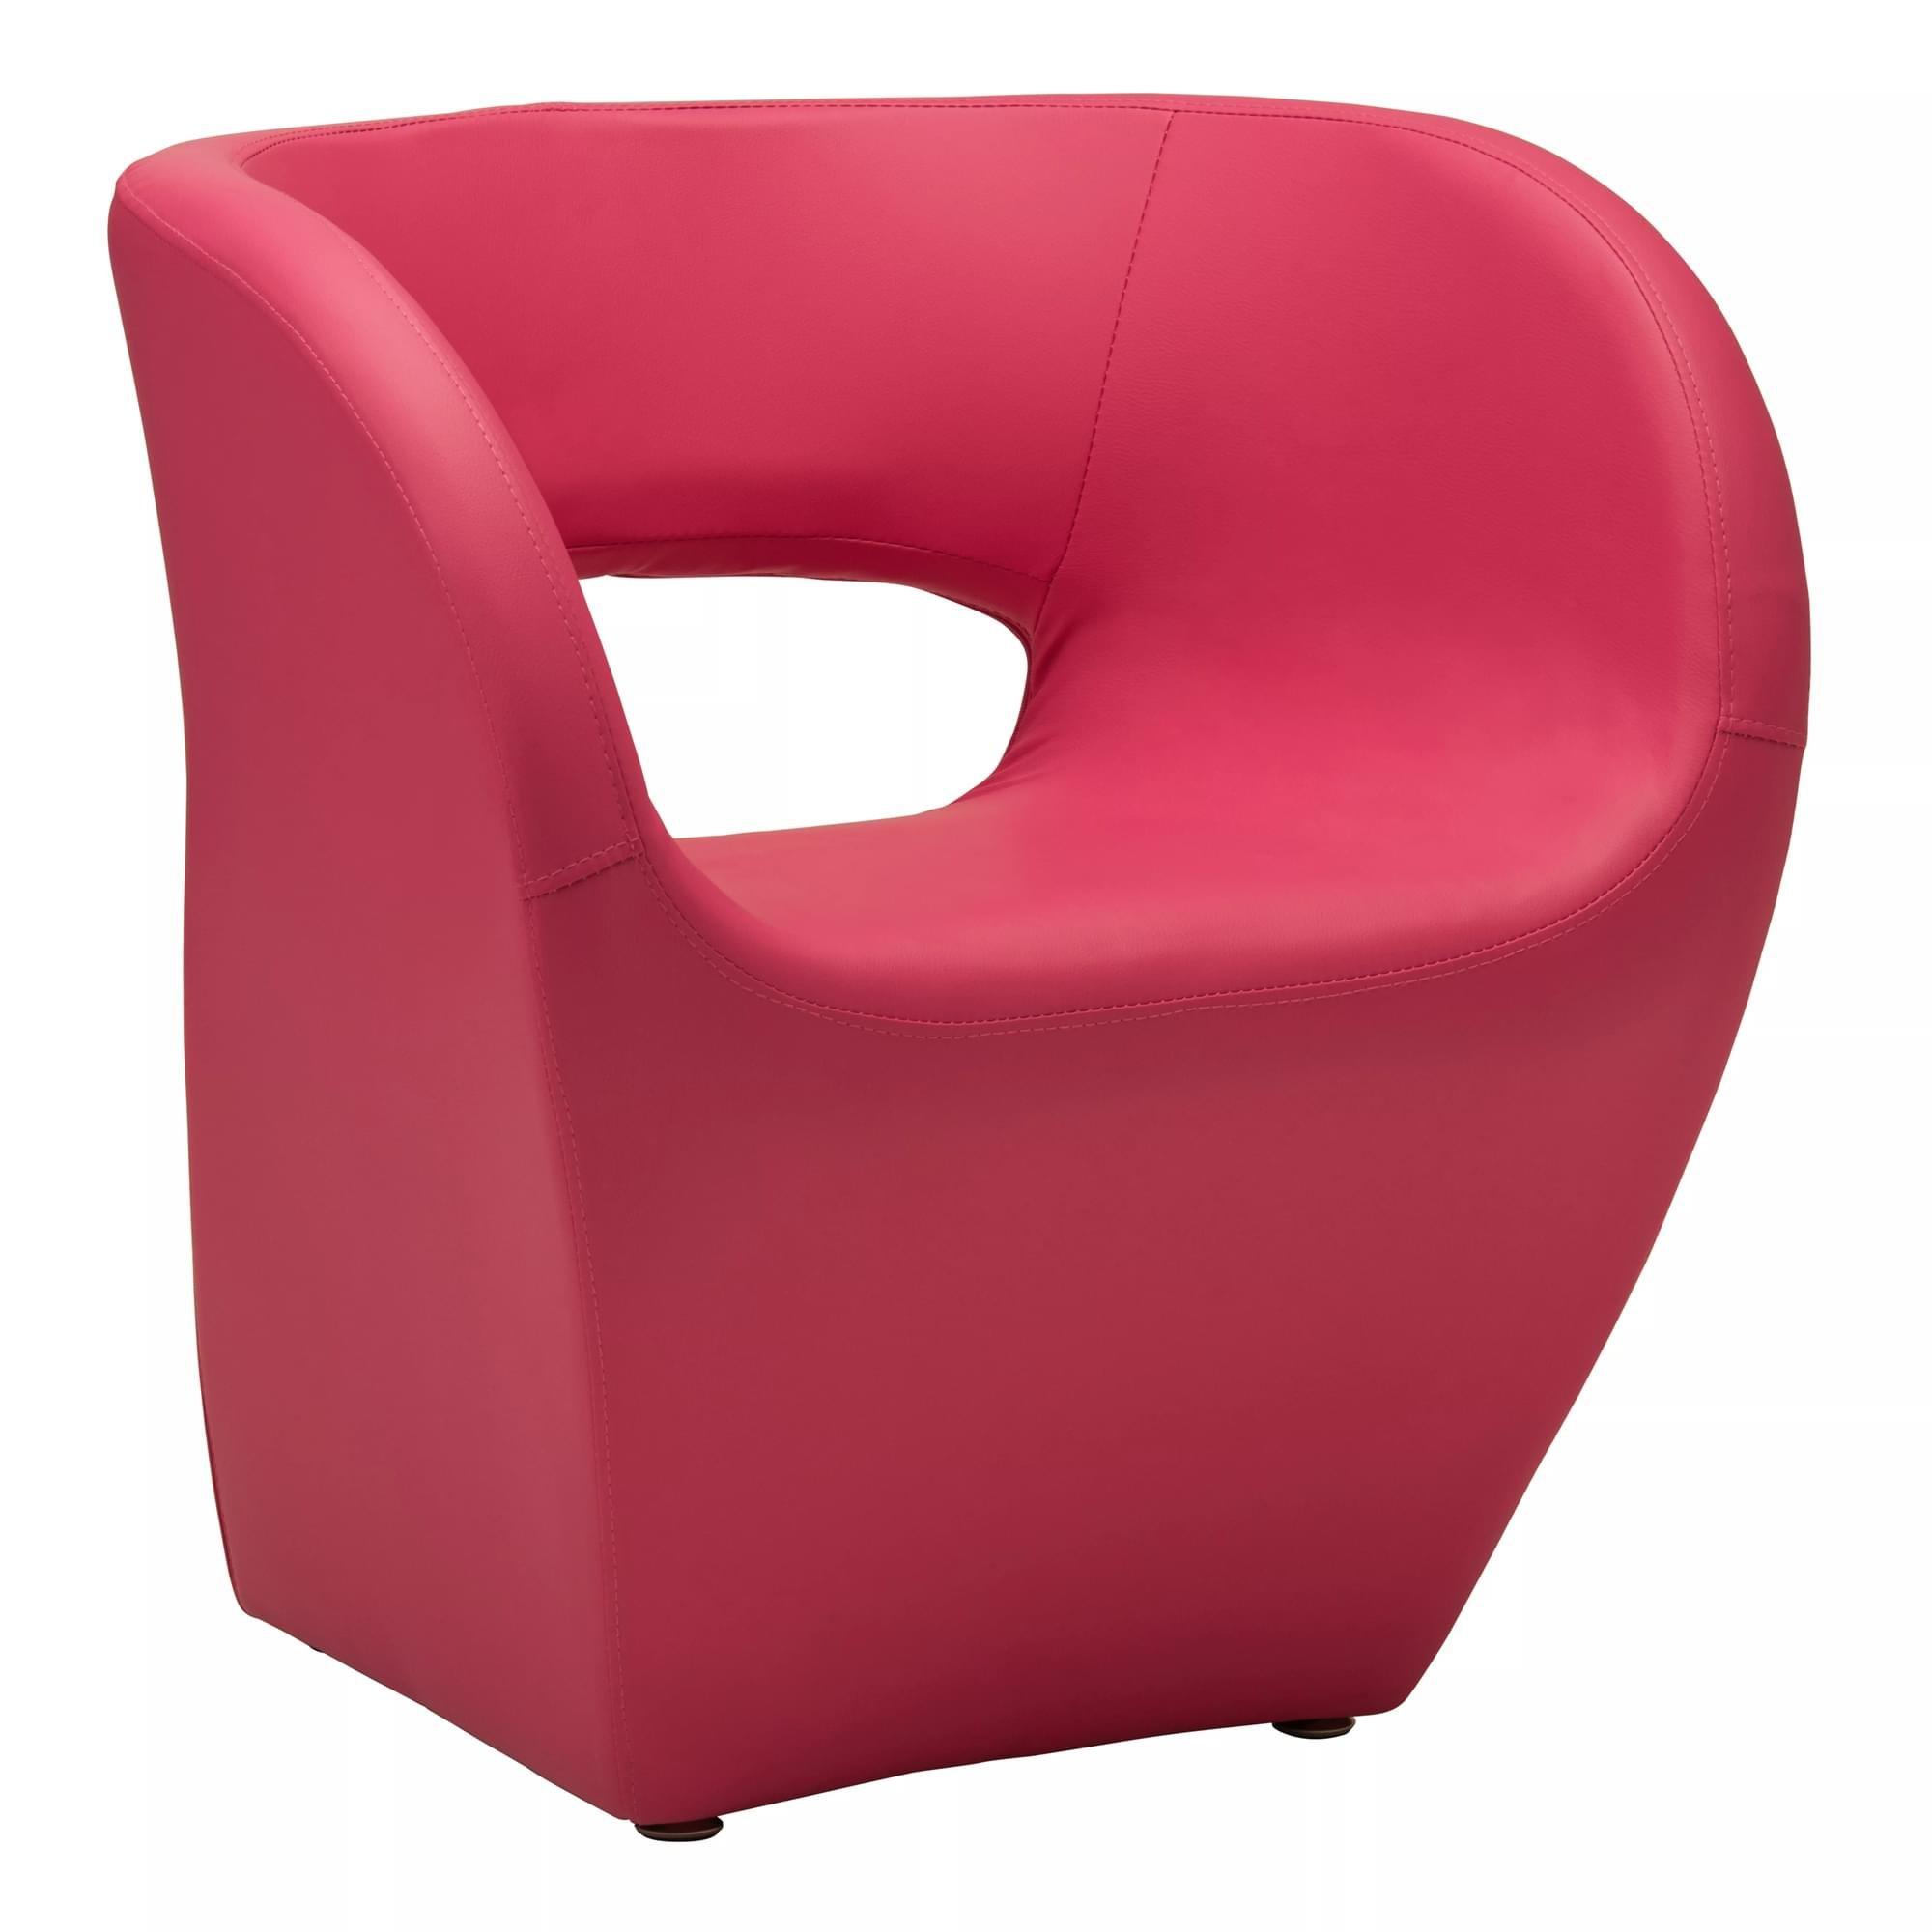 Interiors by Premier Aldo Hot Pink Leather Effect Chair